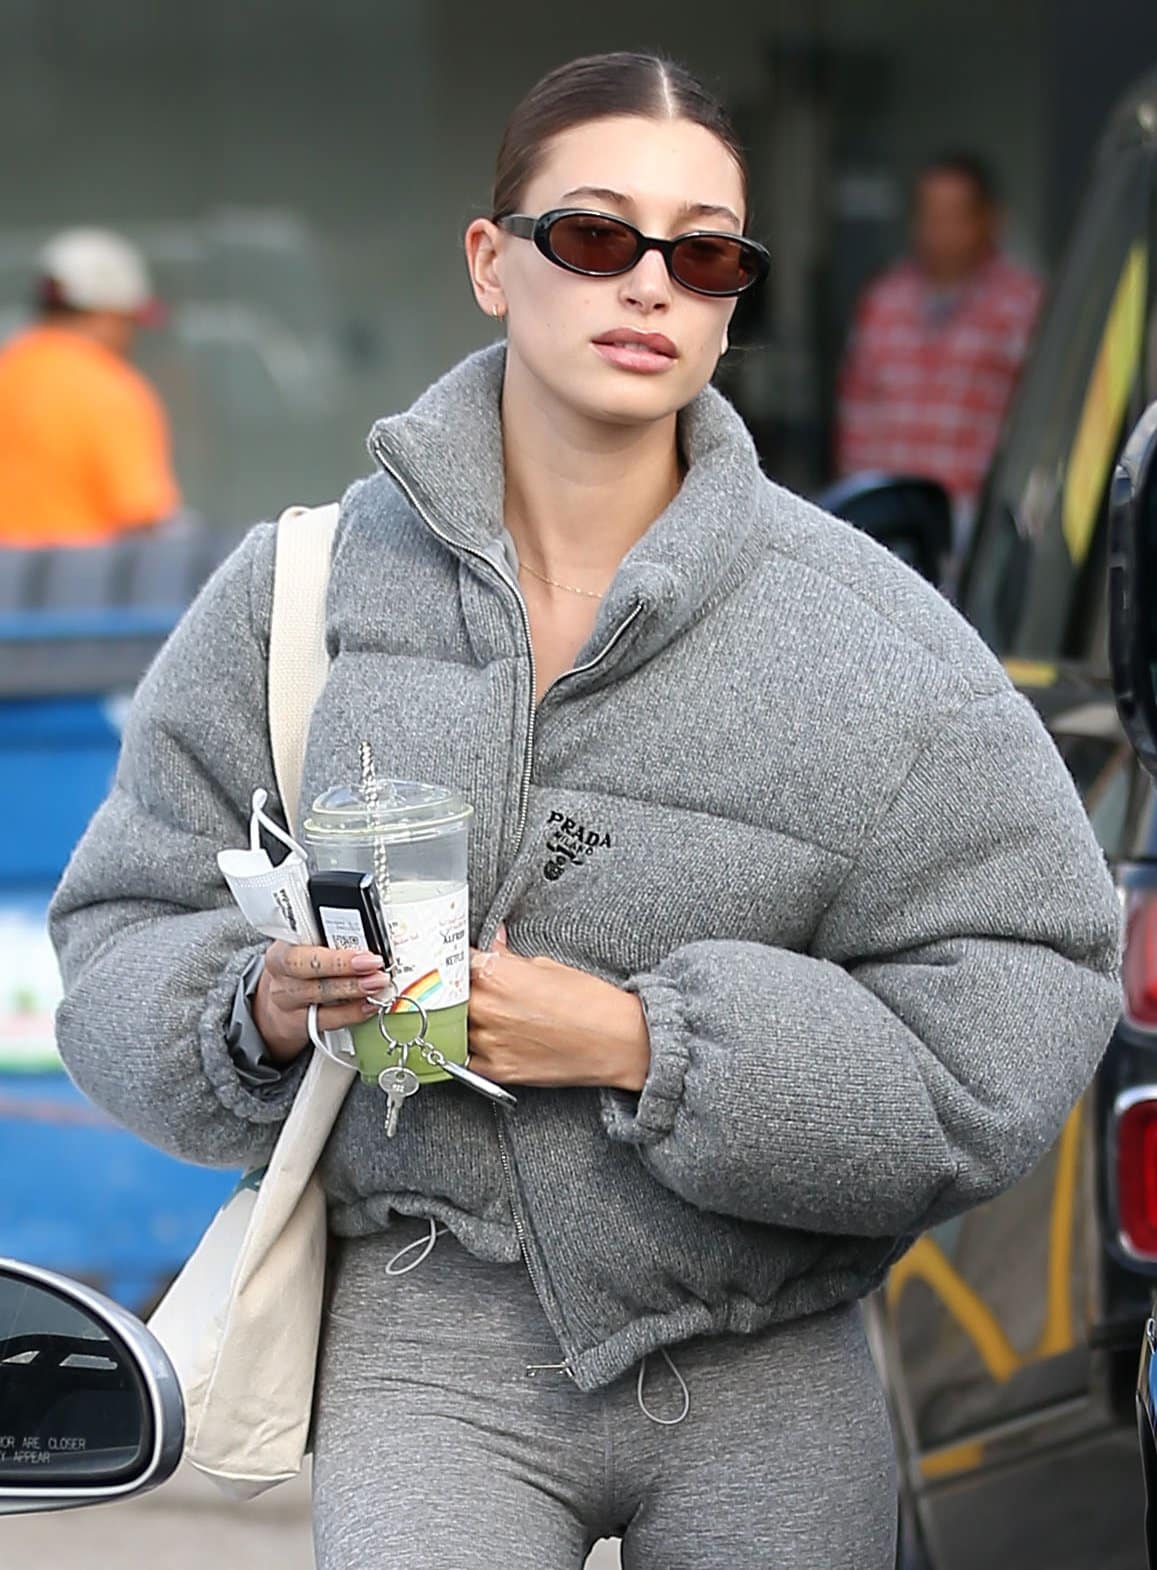 Hailey Bieber pulls her tresses into her signature center-parted bun and wears minimal makeup with DMY by DMY sunglasses